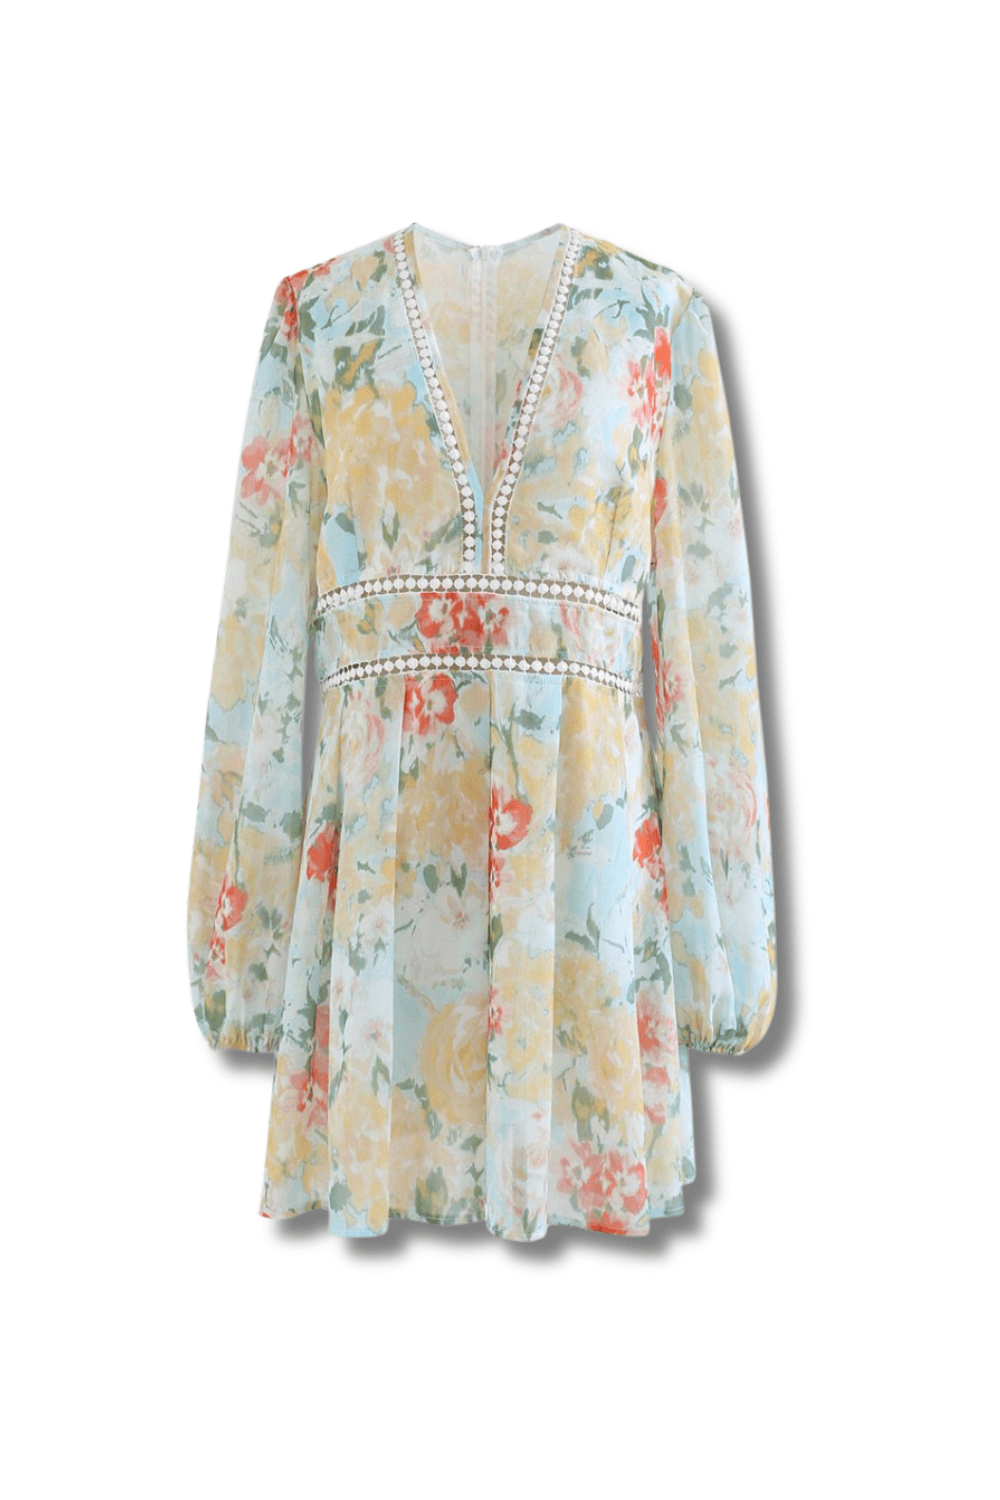 Zimmermann-inspired-dresses-The-Whimsical-Watercolor-Floral-Dress